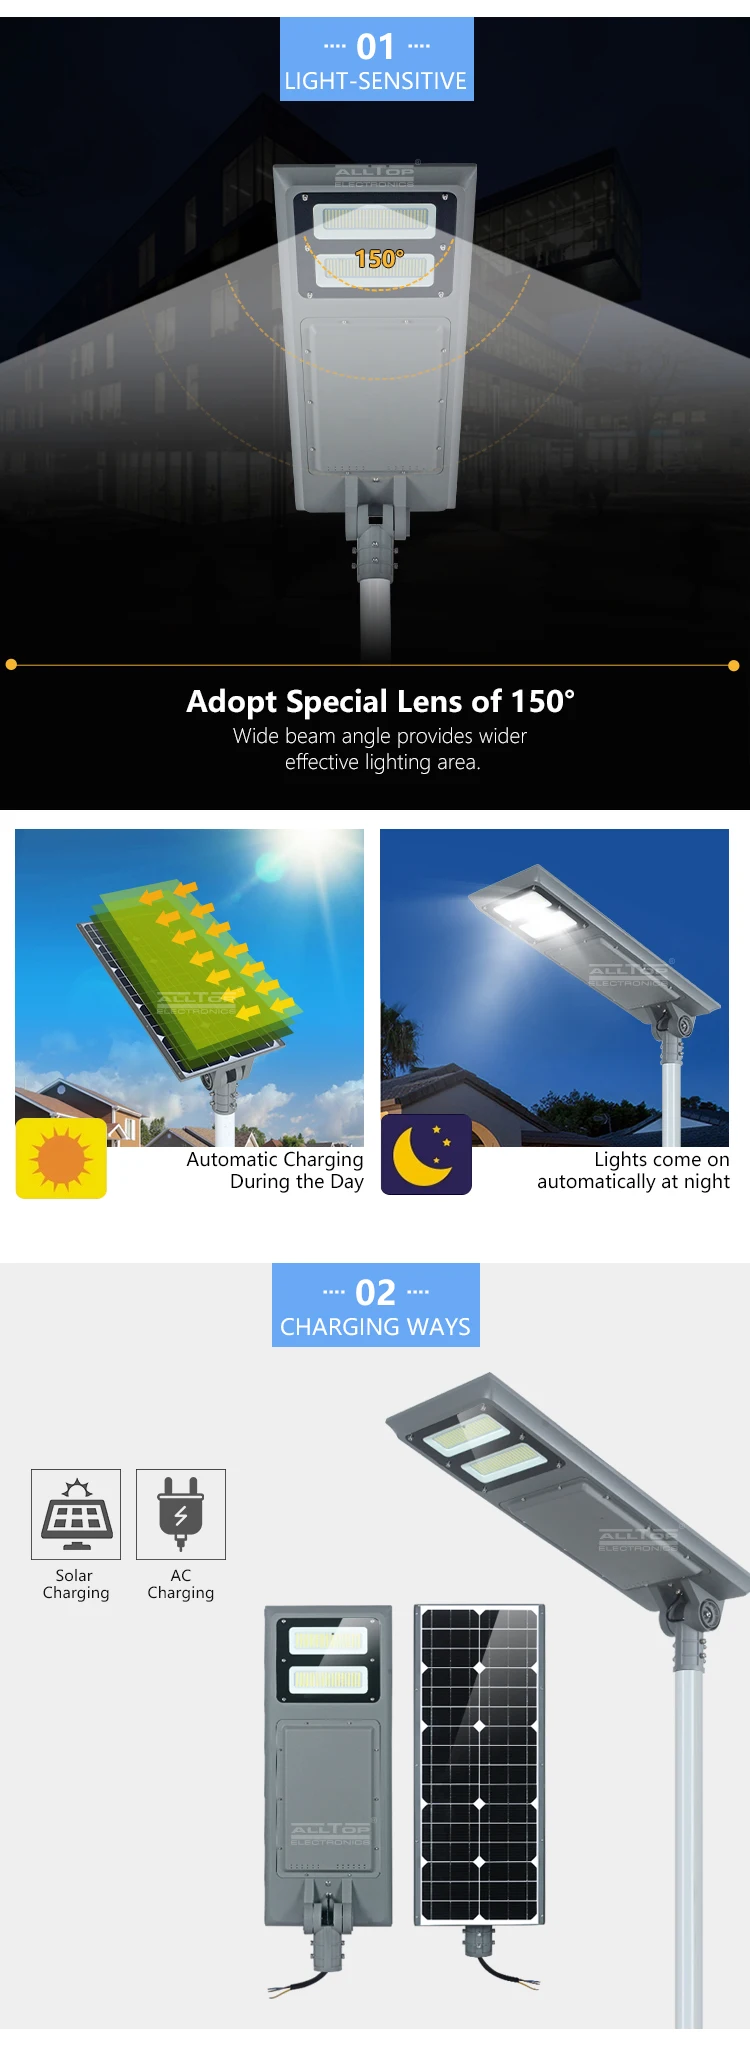 ALLTOP Outdoor lighting IP65 waterproof 100w integrated all in one led solar street light